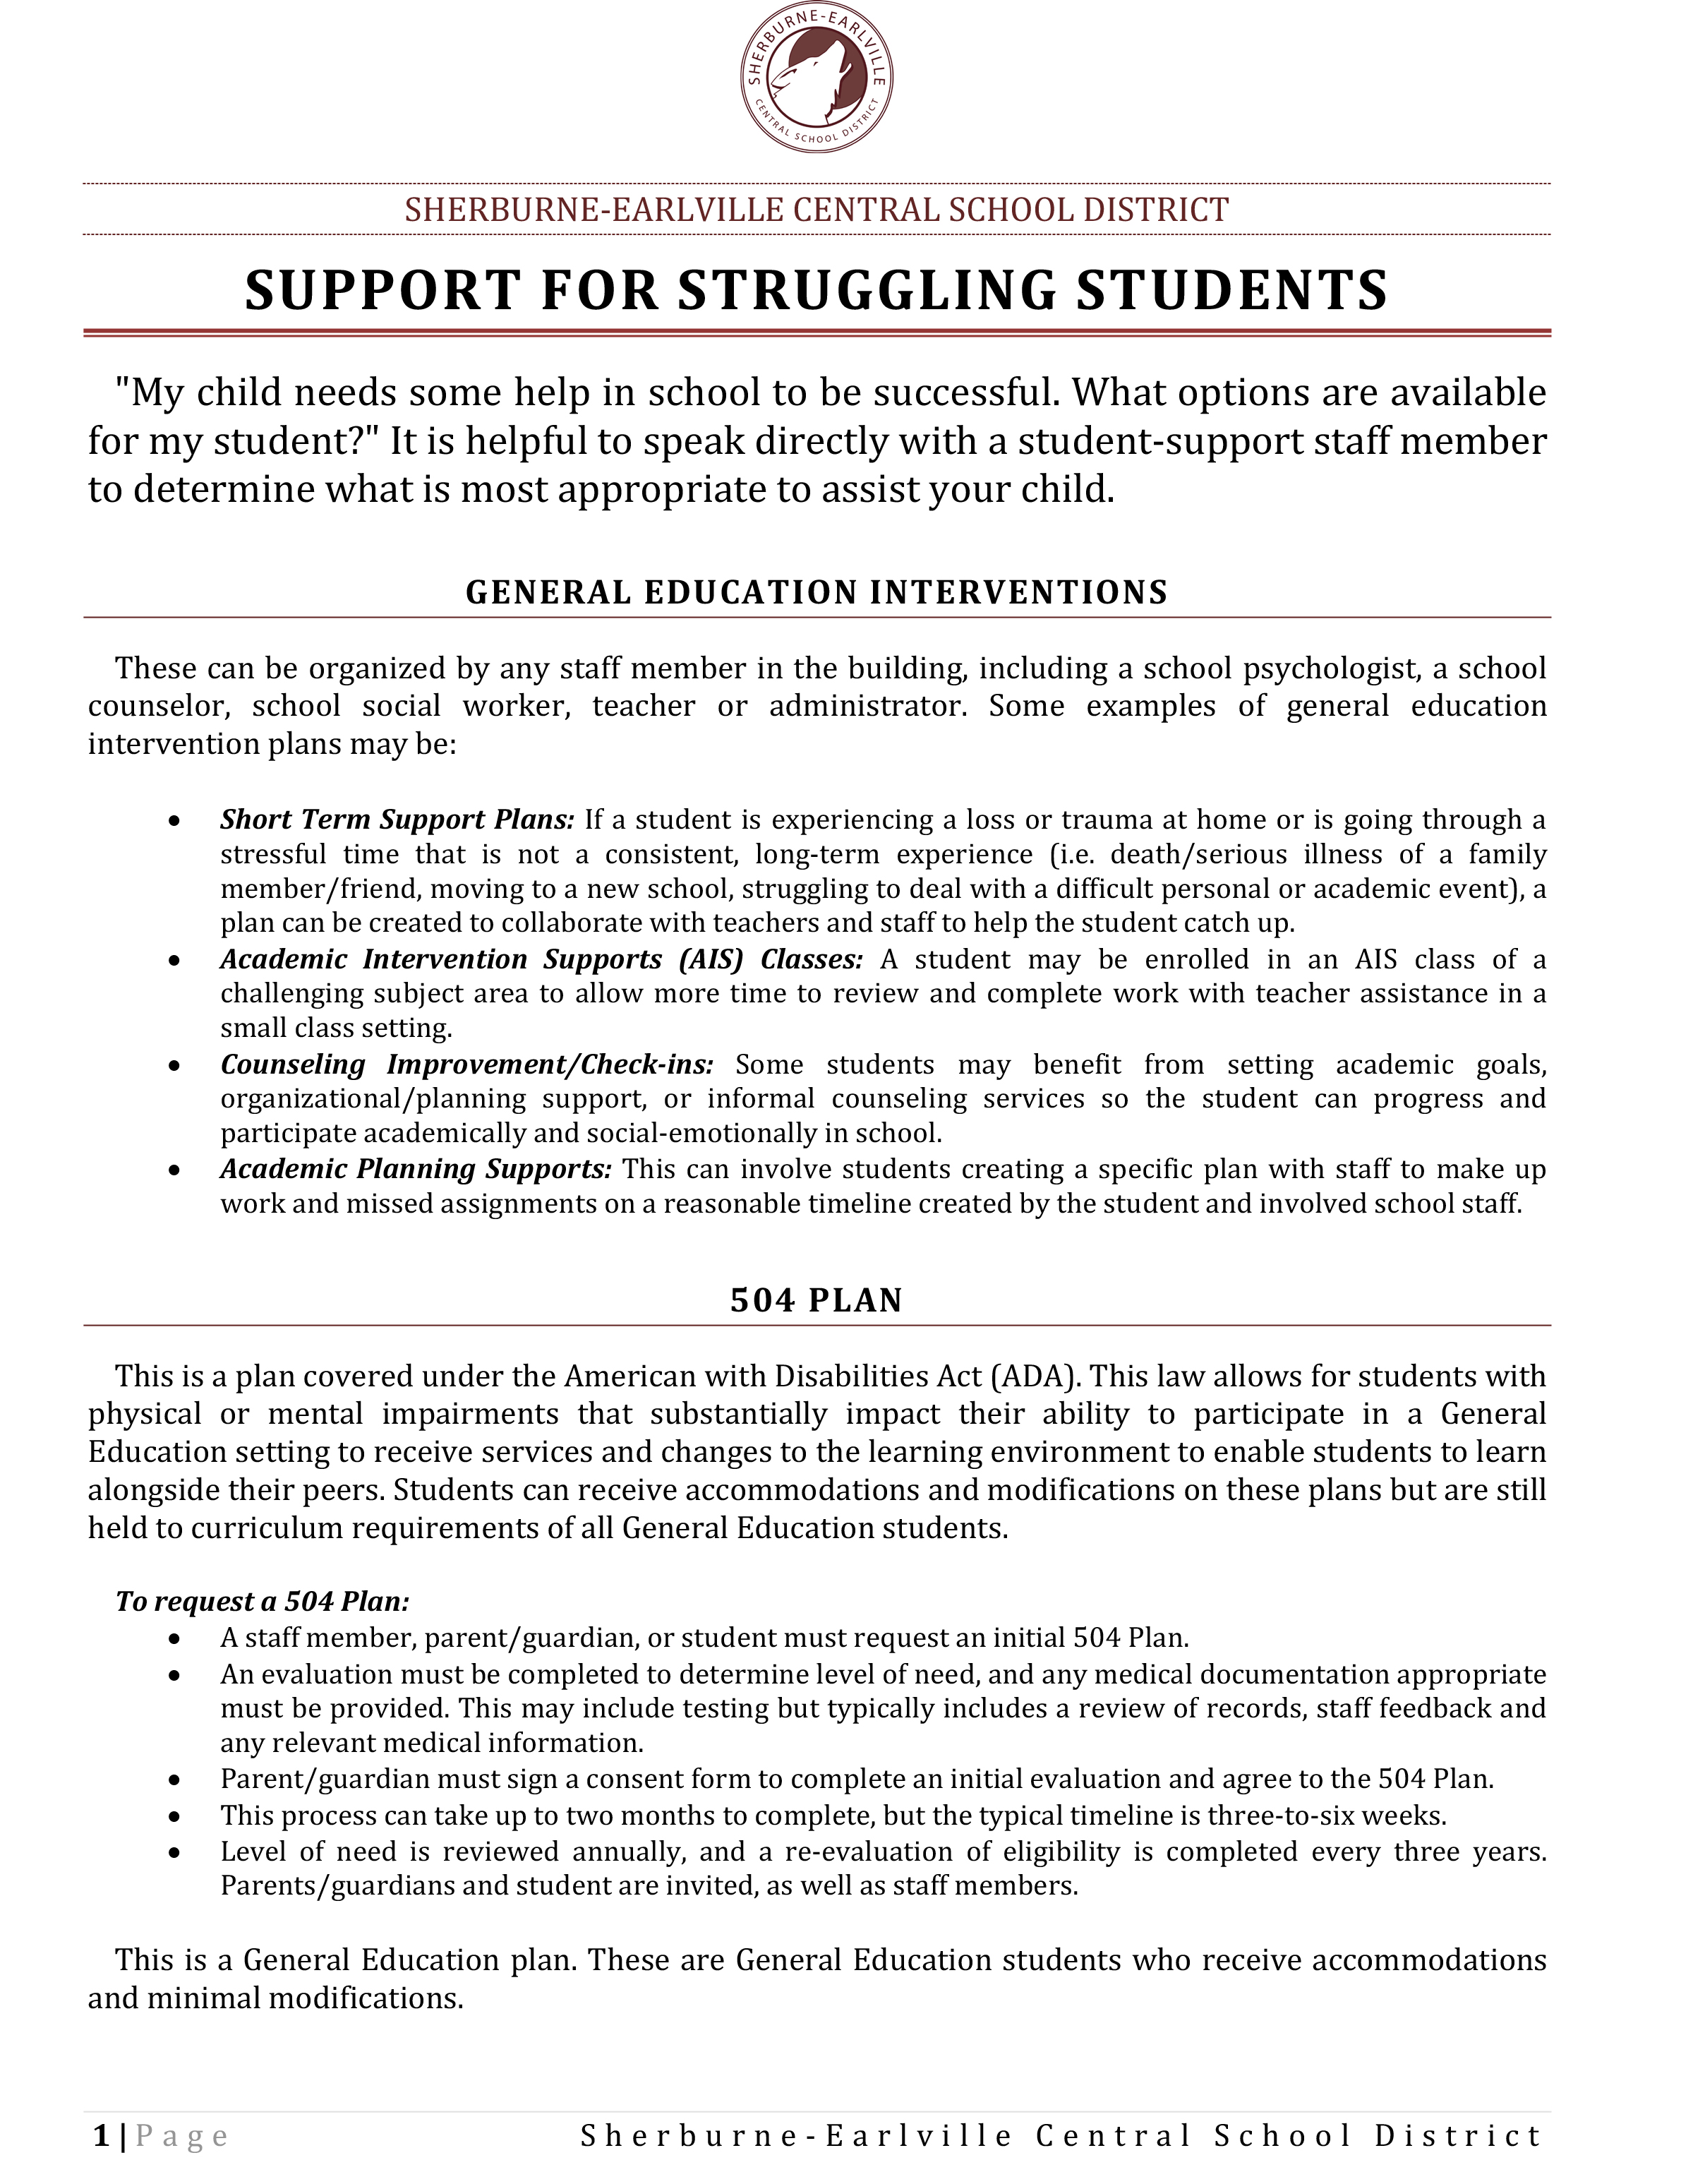 Support for Struggling Students cover (1/2021)